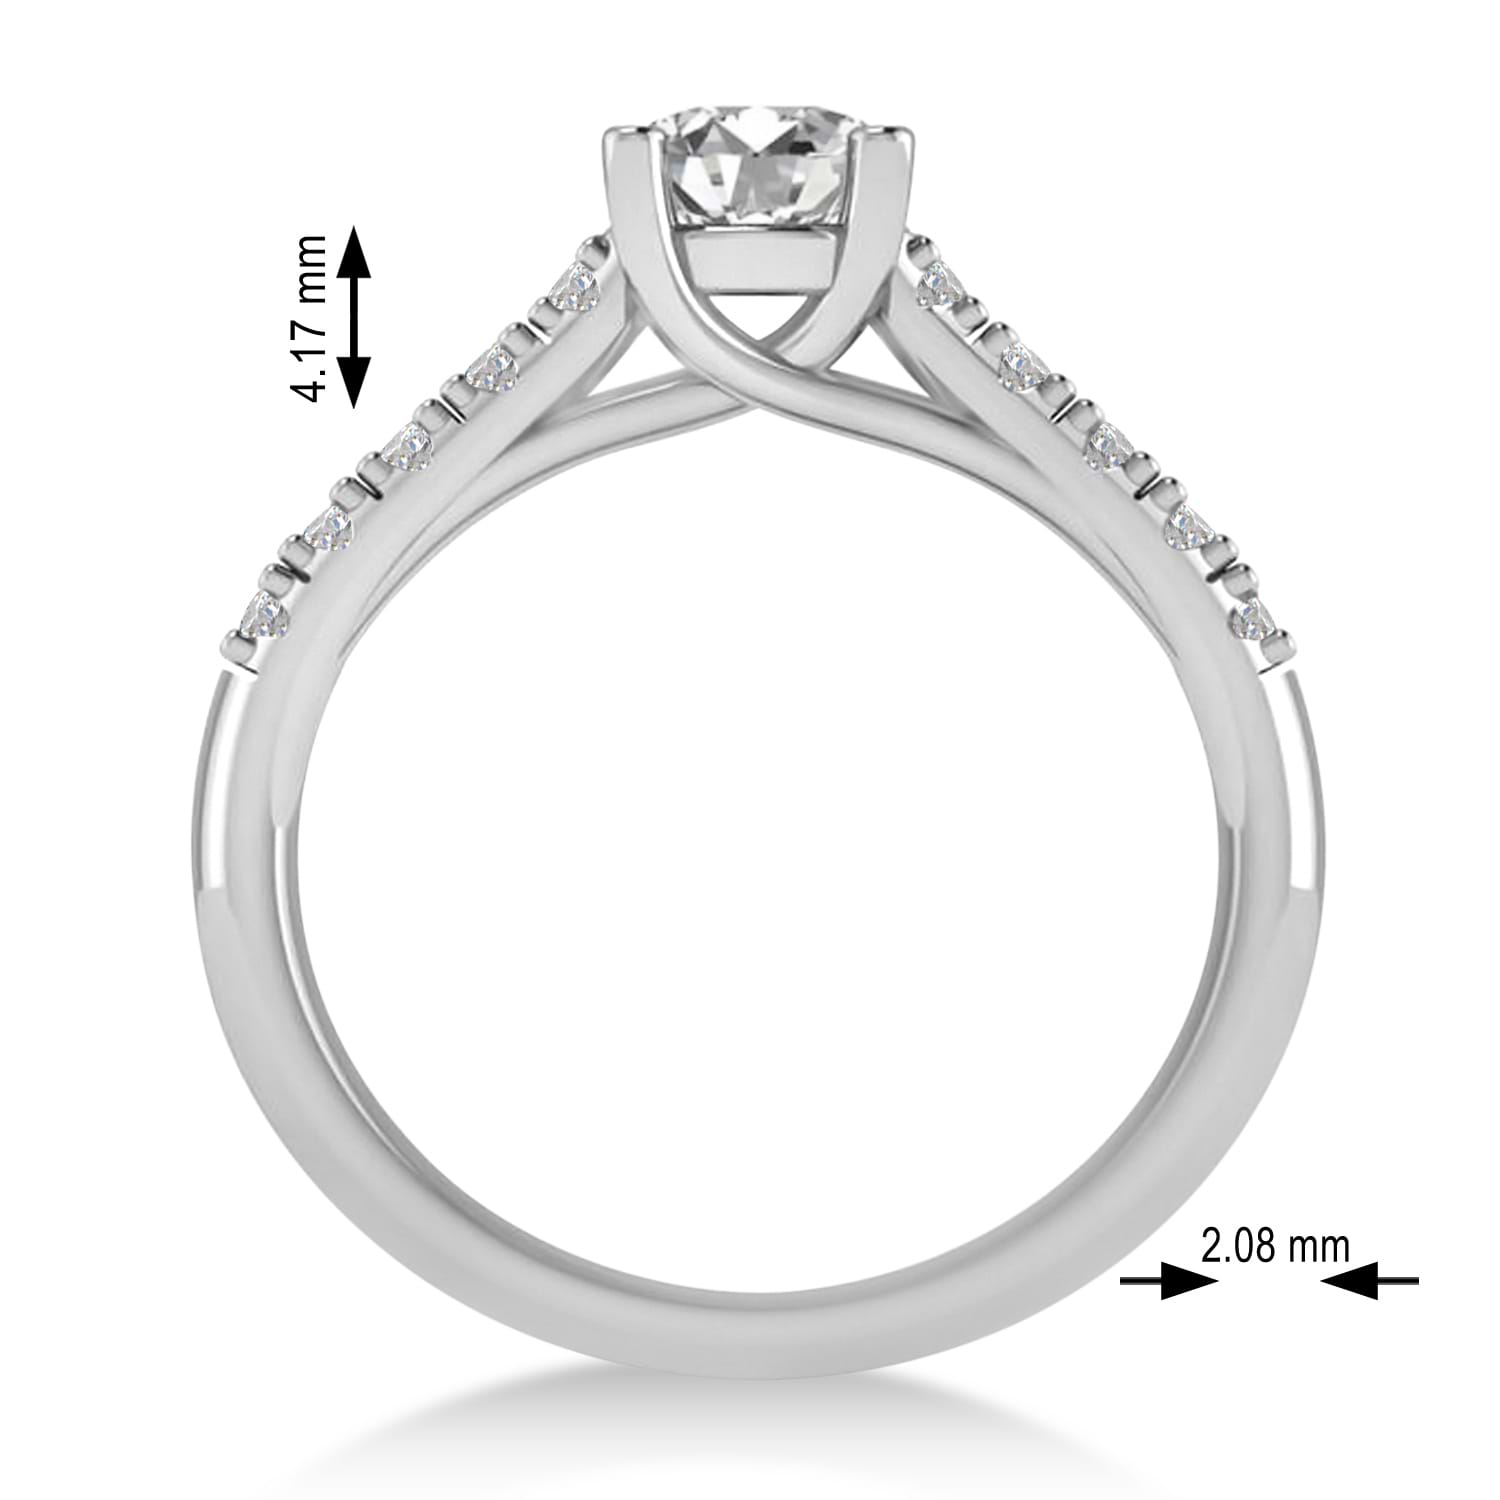 Diamond Accented Pre-Set Engagement Ring 14k White Gold (1.05ct)